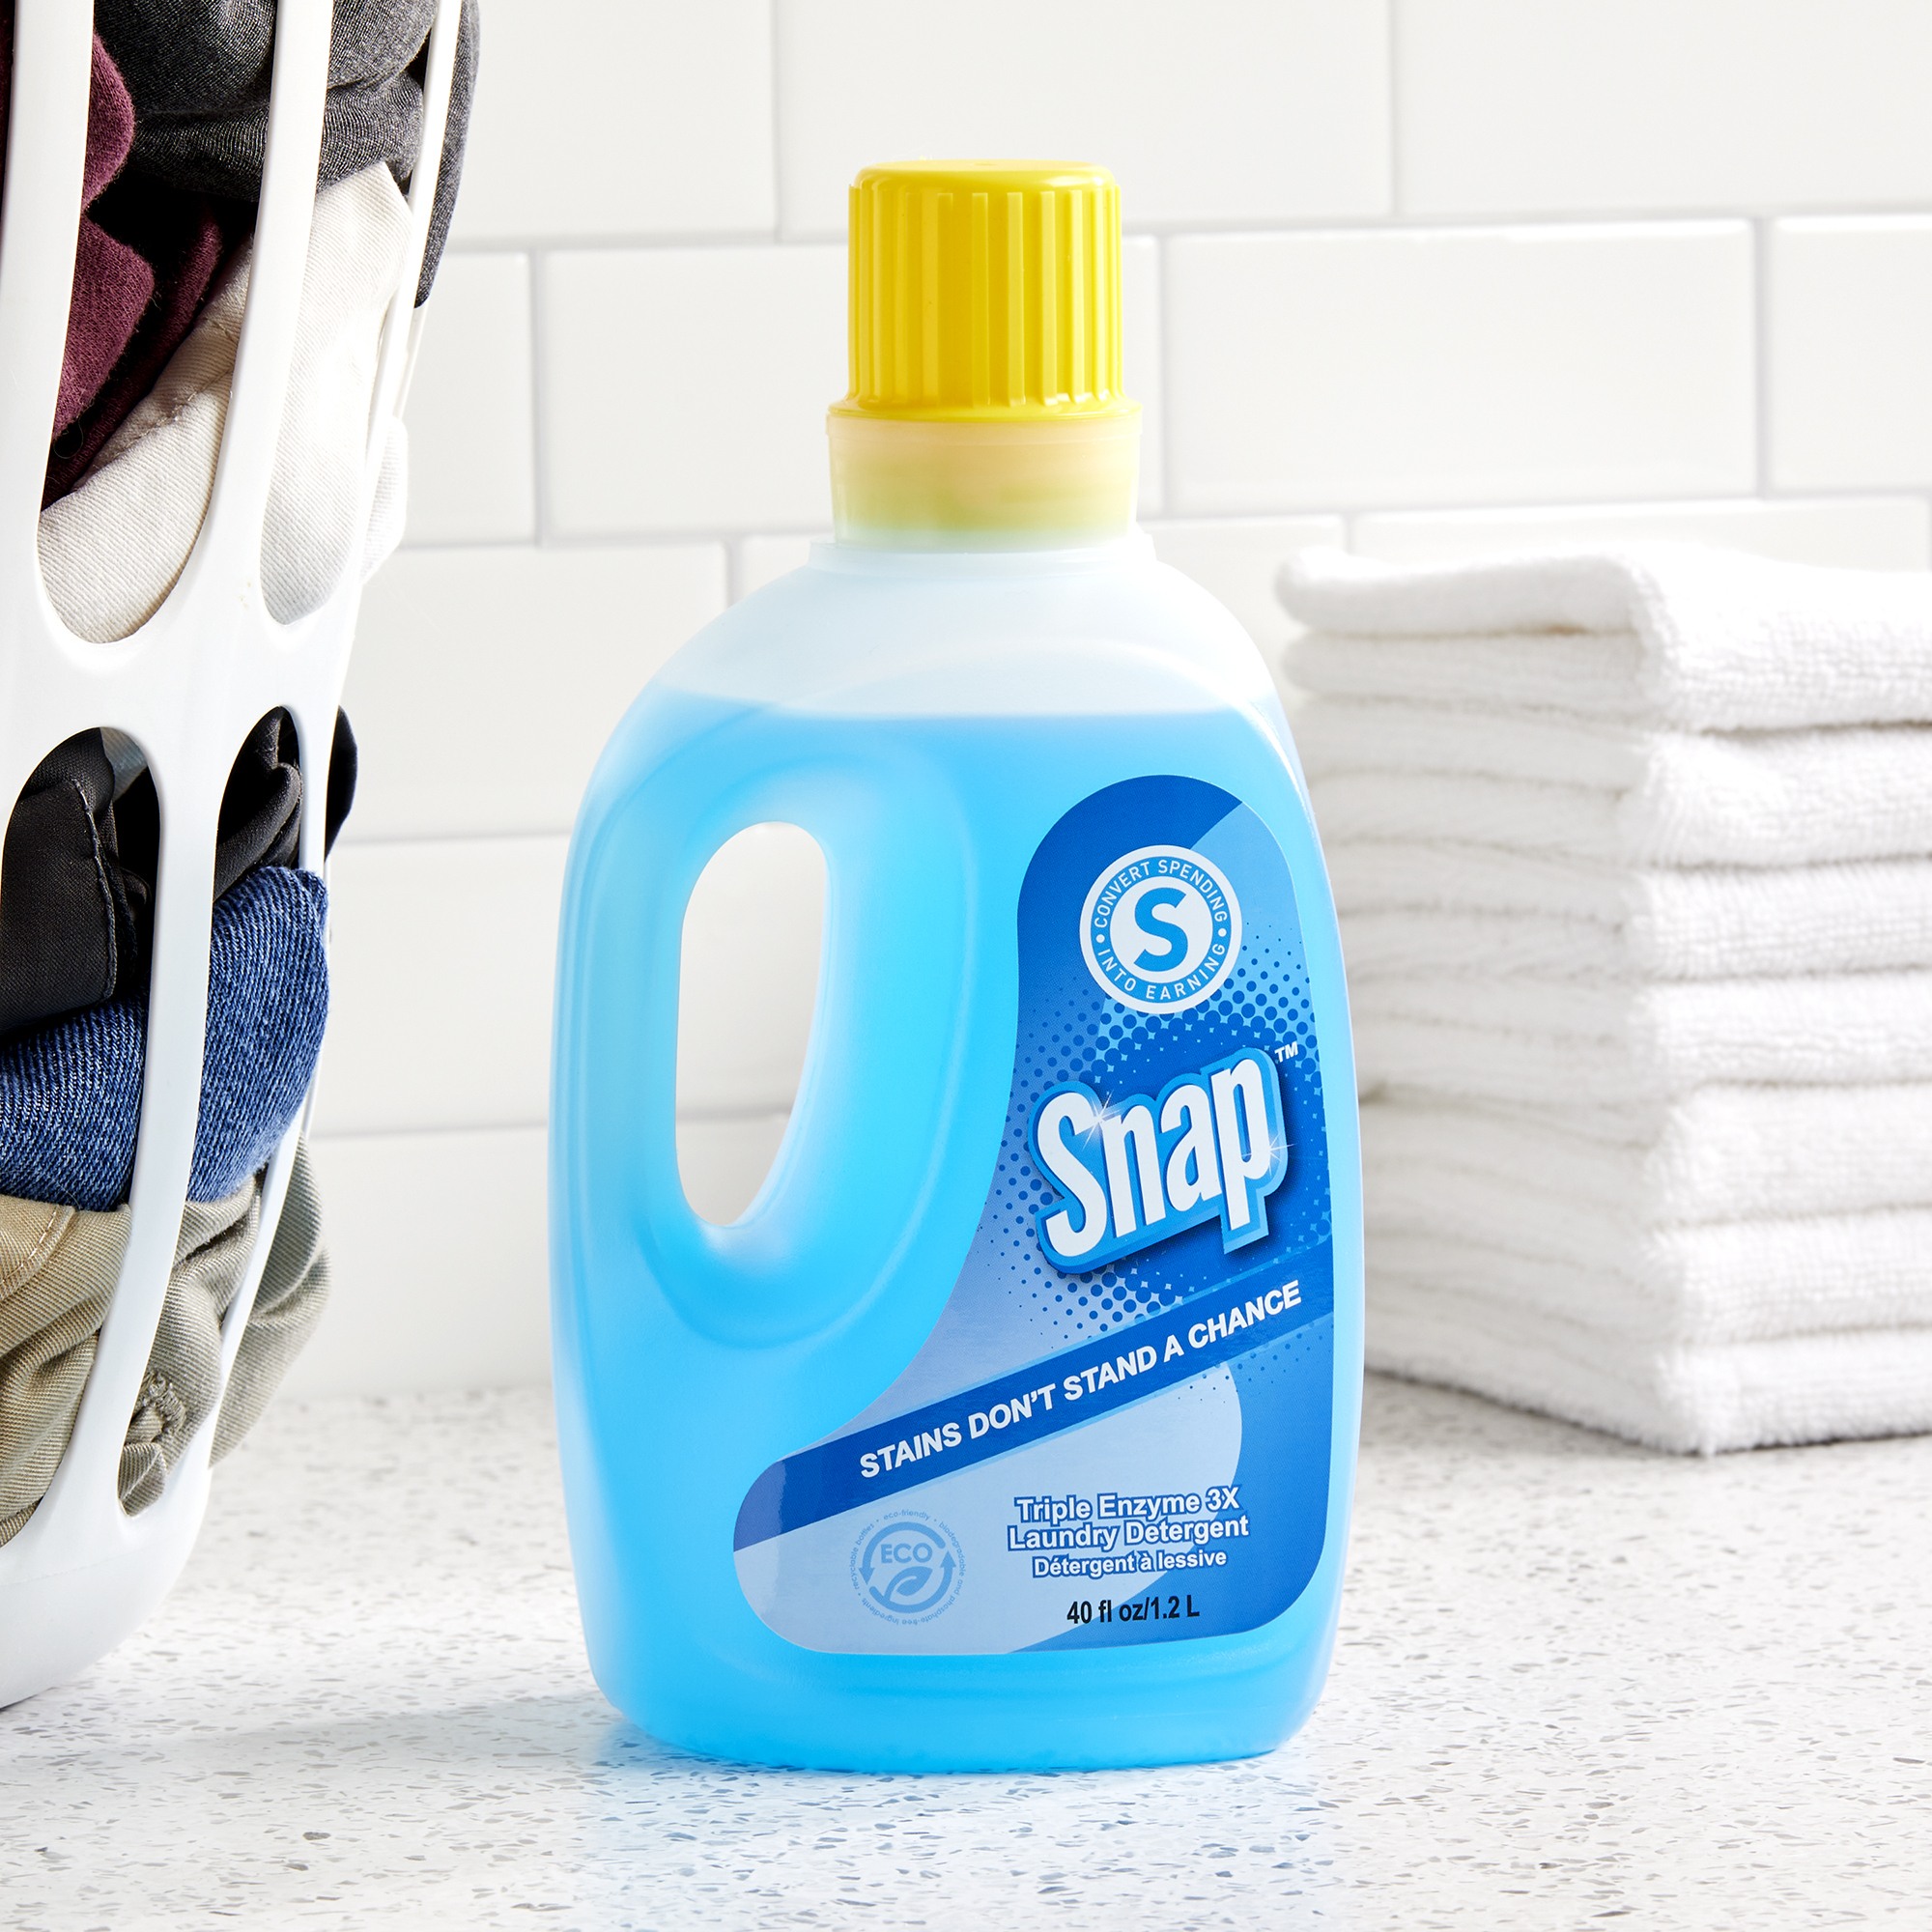 Shopping Annuity Brand SNAP Triple Enzyme 3X Laundry Detergent alternate image